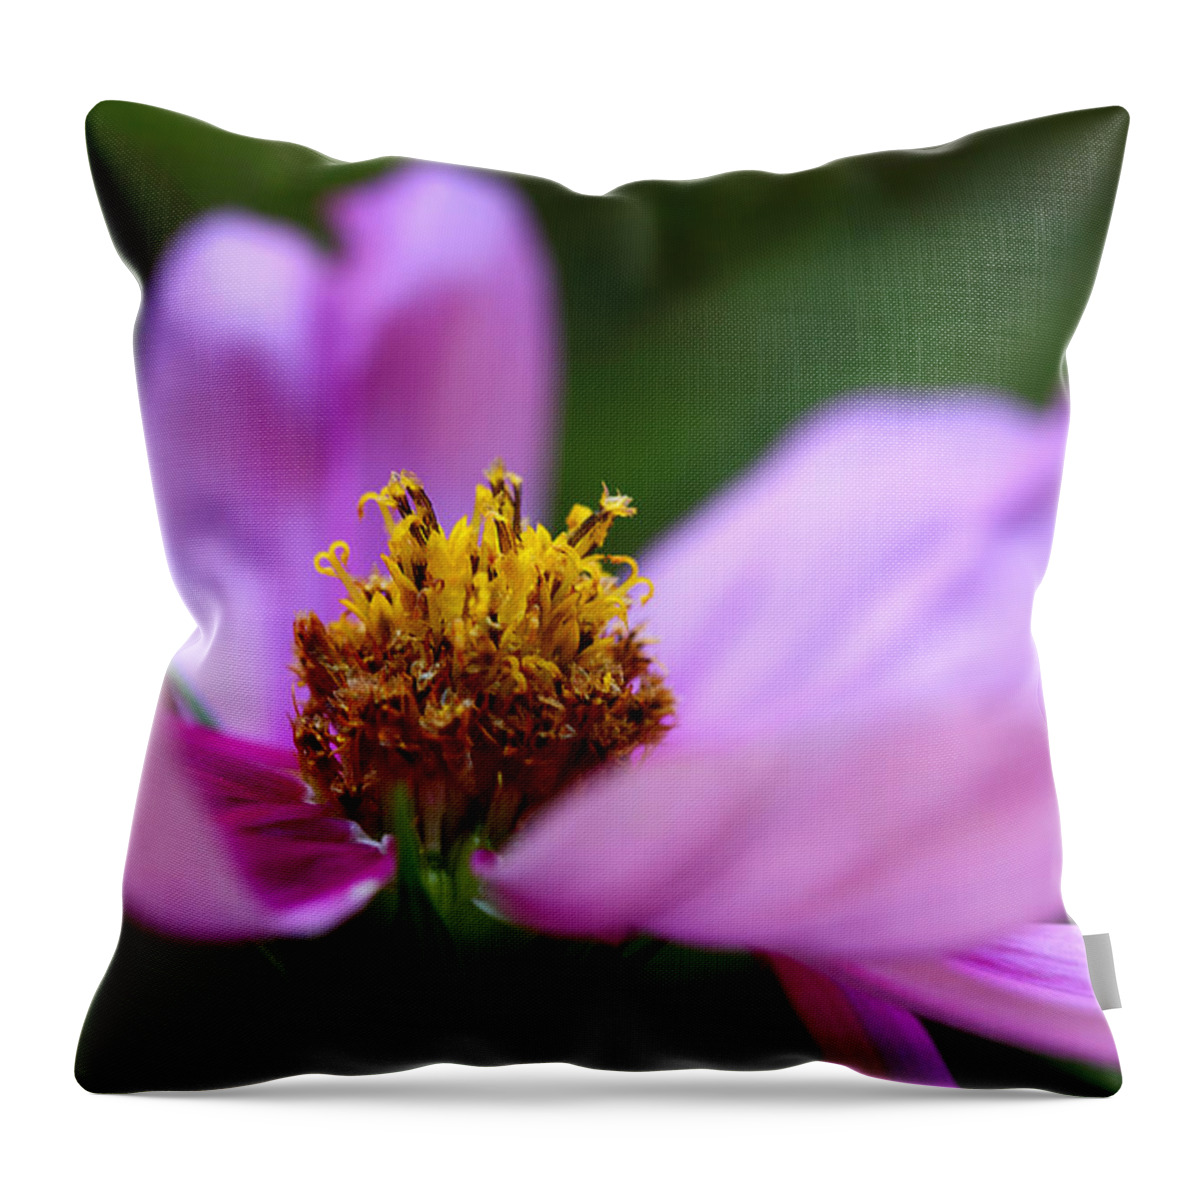 Cosmos Flower Throw Pillow featuring the photograph Heart Of Solitude by Michael Eingle